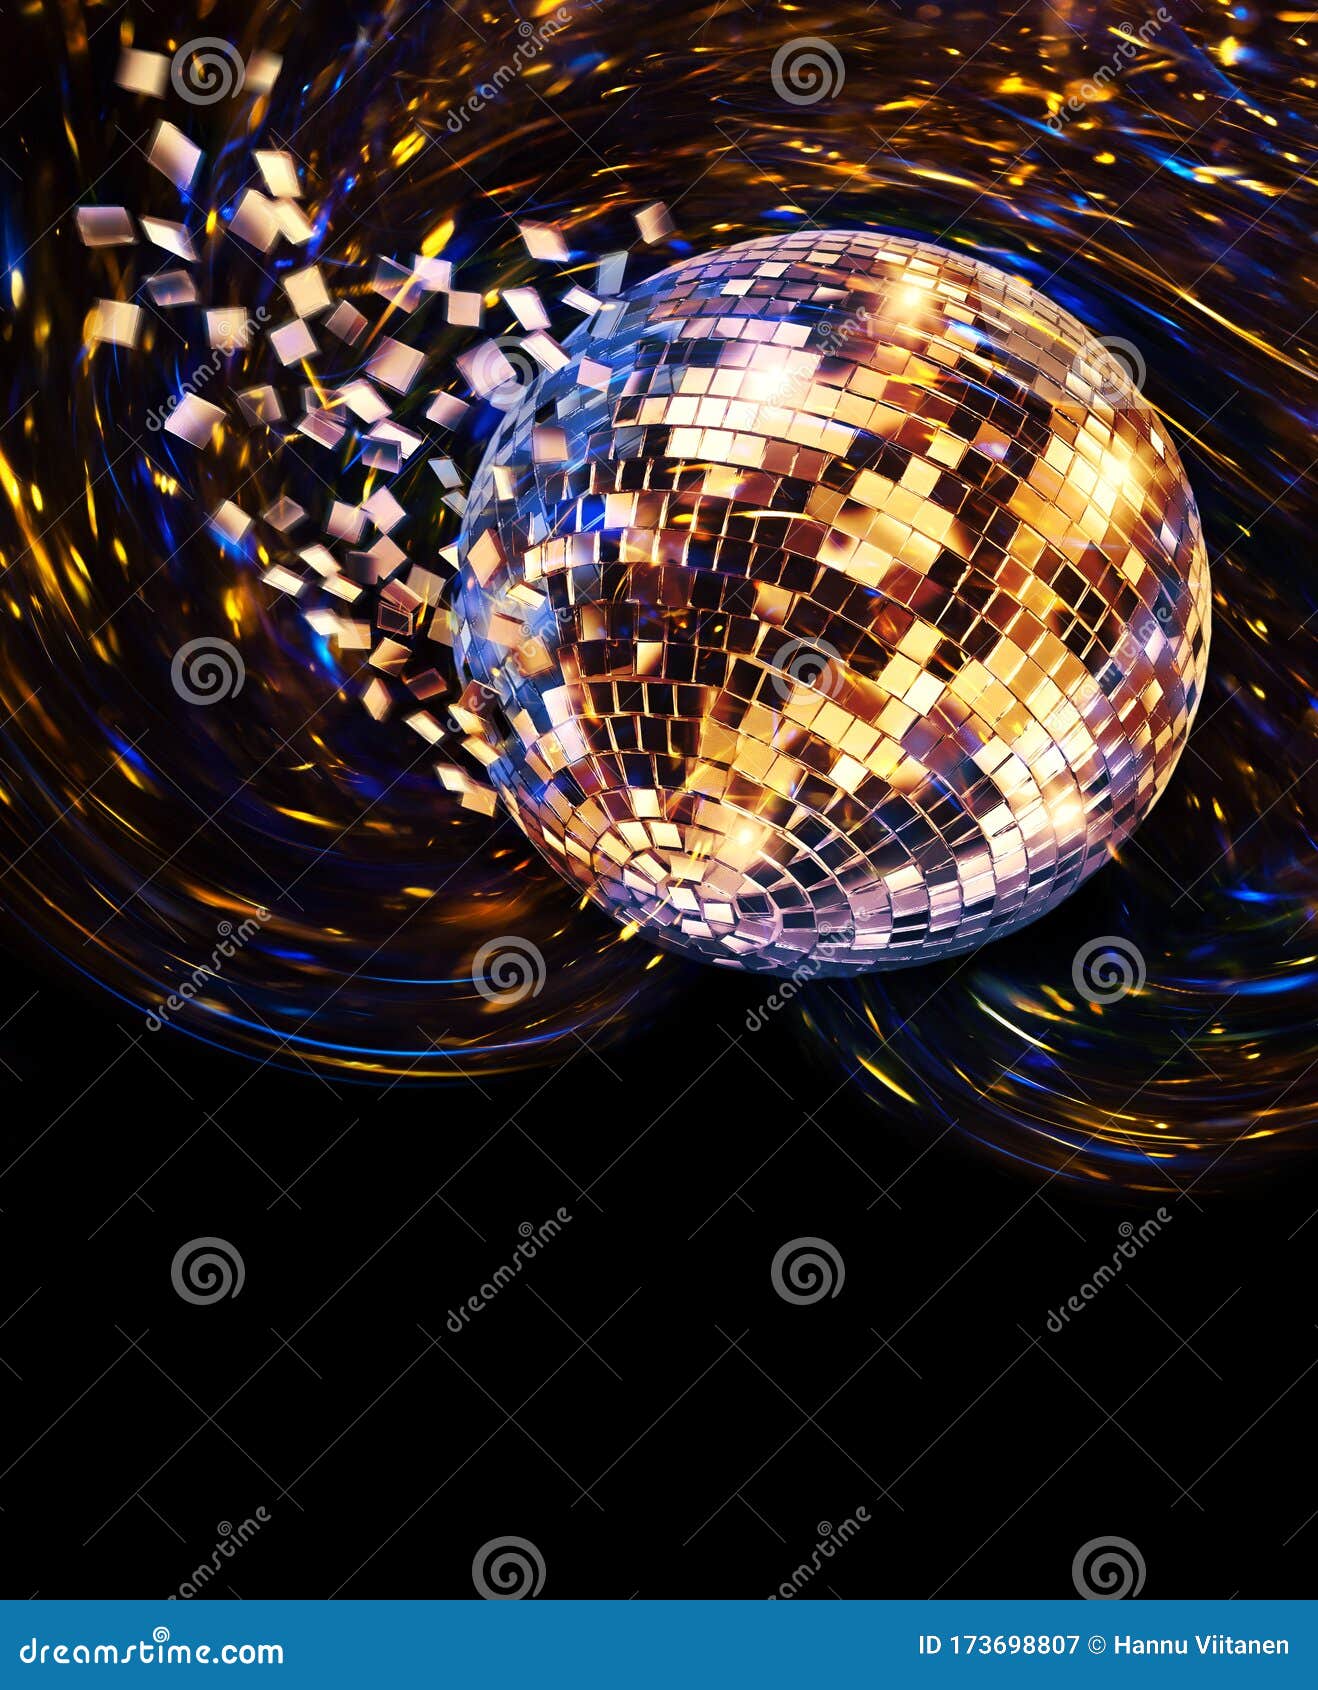 golden disco mirror ball turning and breaking into fragments